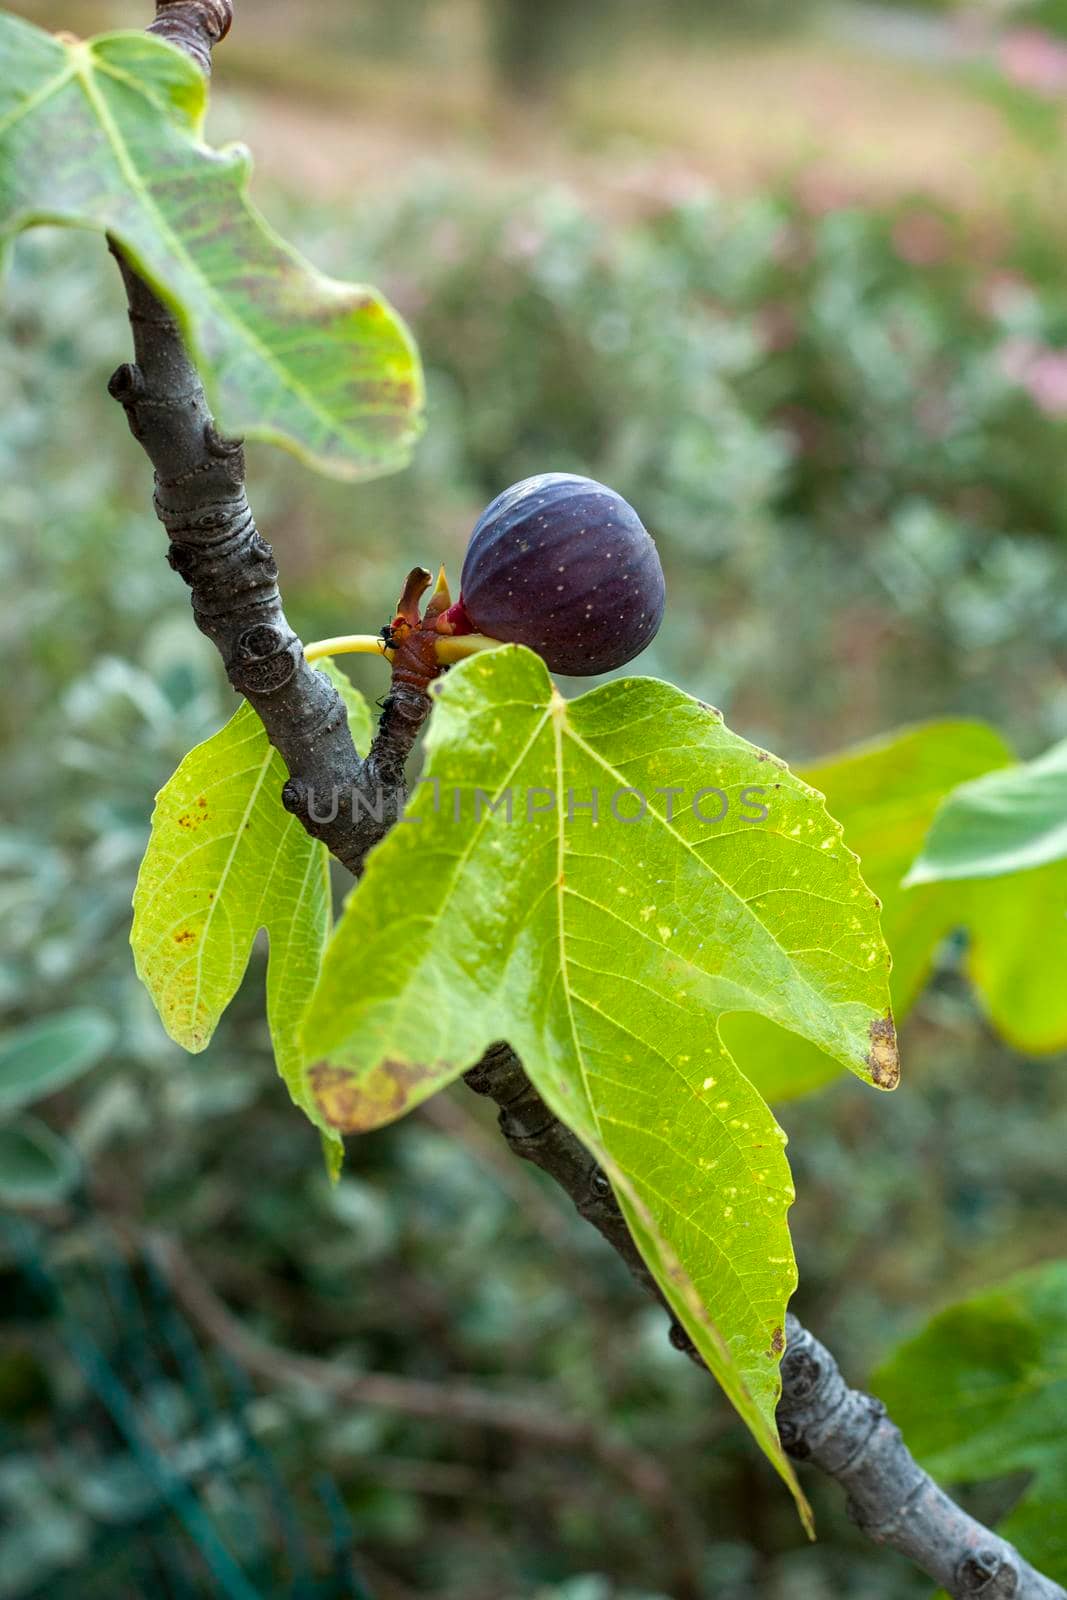 fig fruit growing on a fig tree